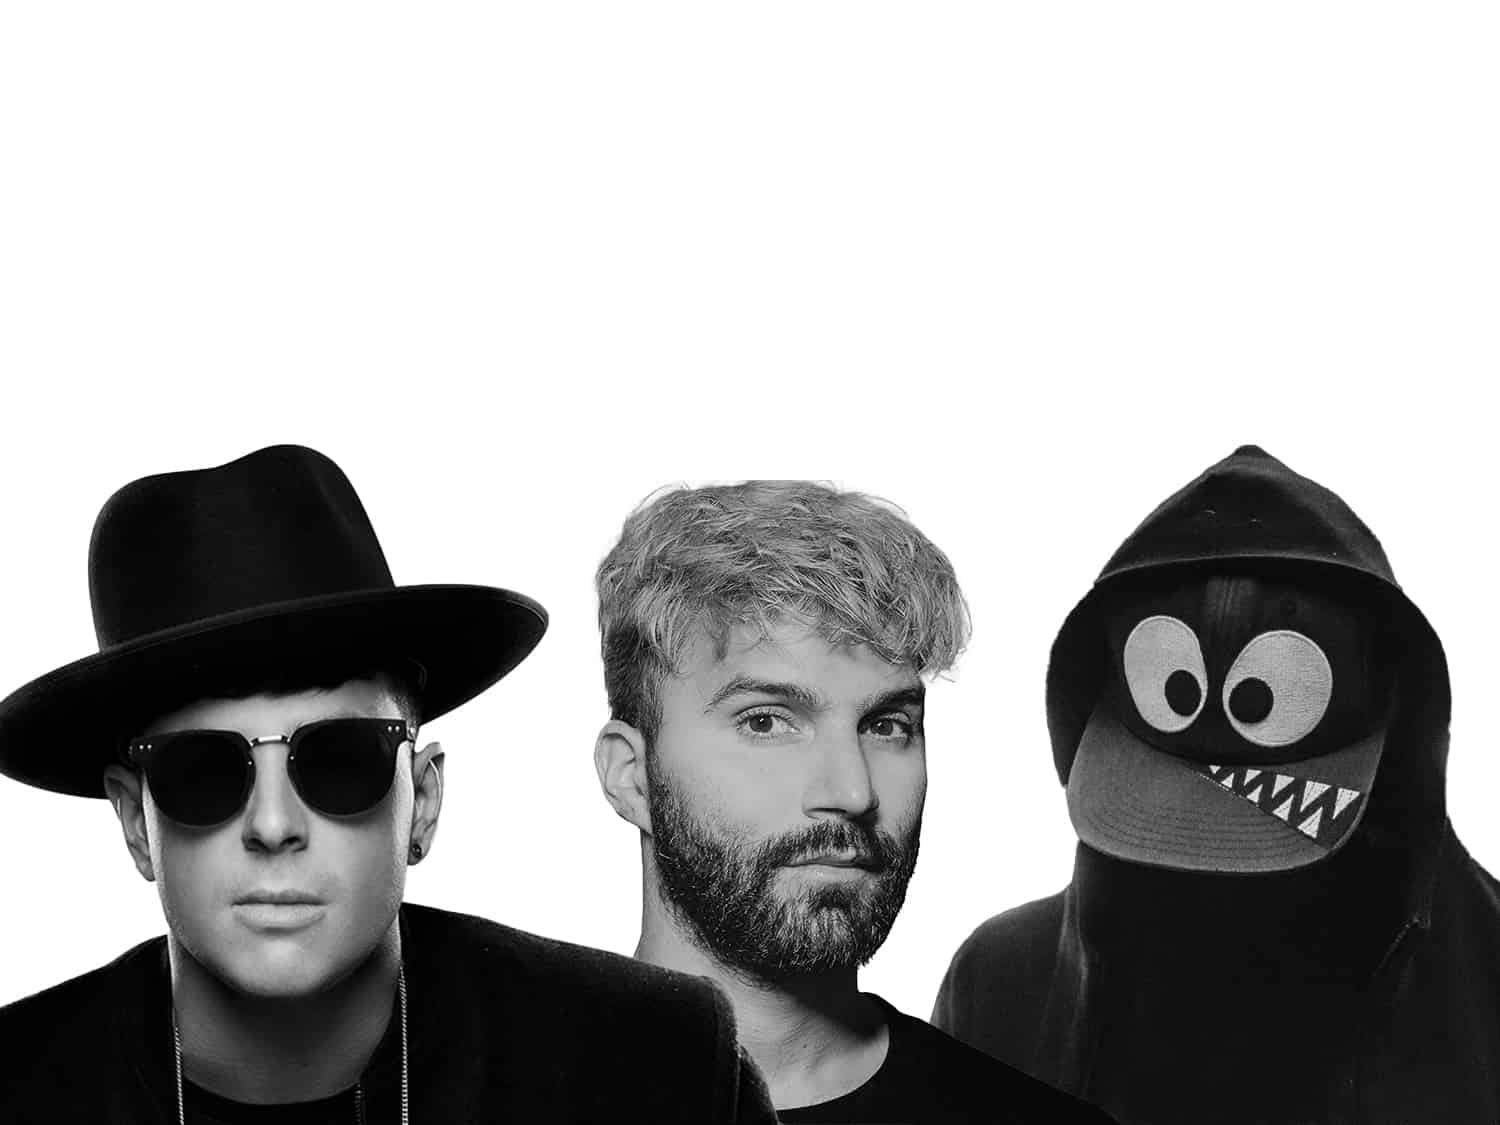 Timmy Trumpet & R3HAB team up for remix of ‘Dom Dom Yes Yes’: Listen